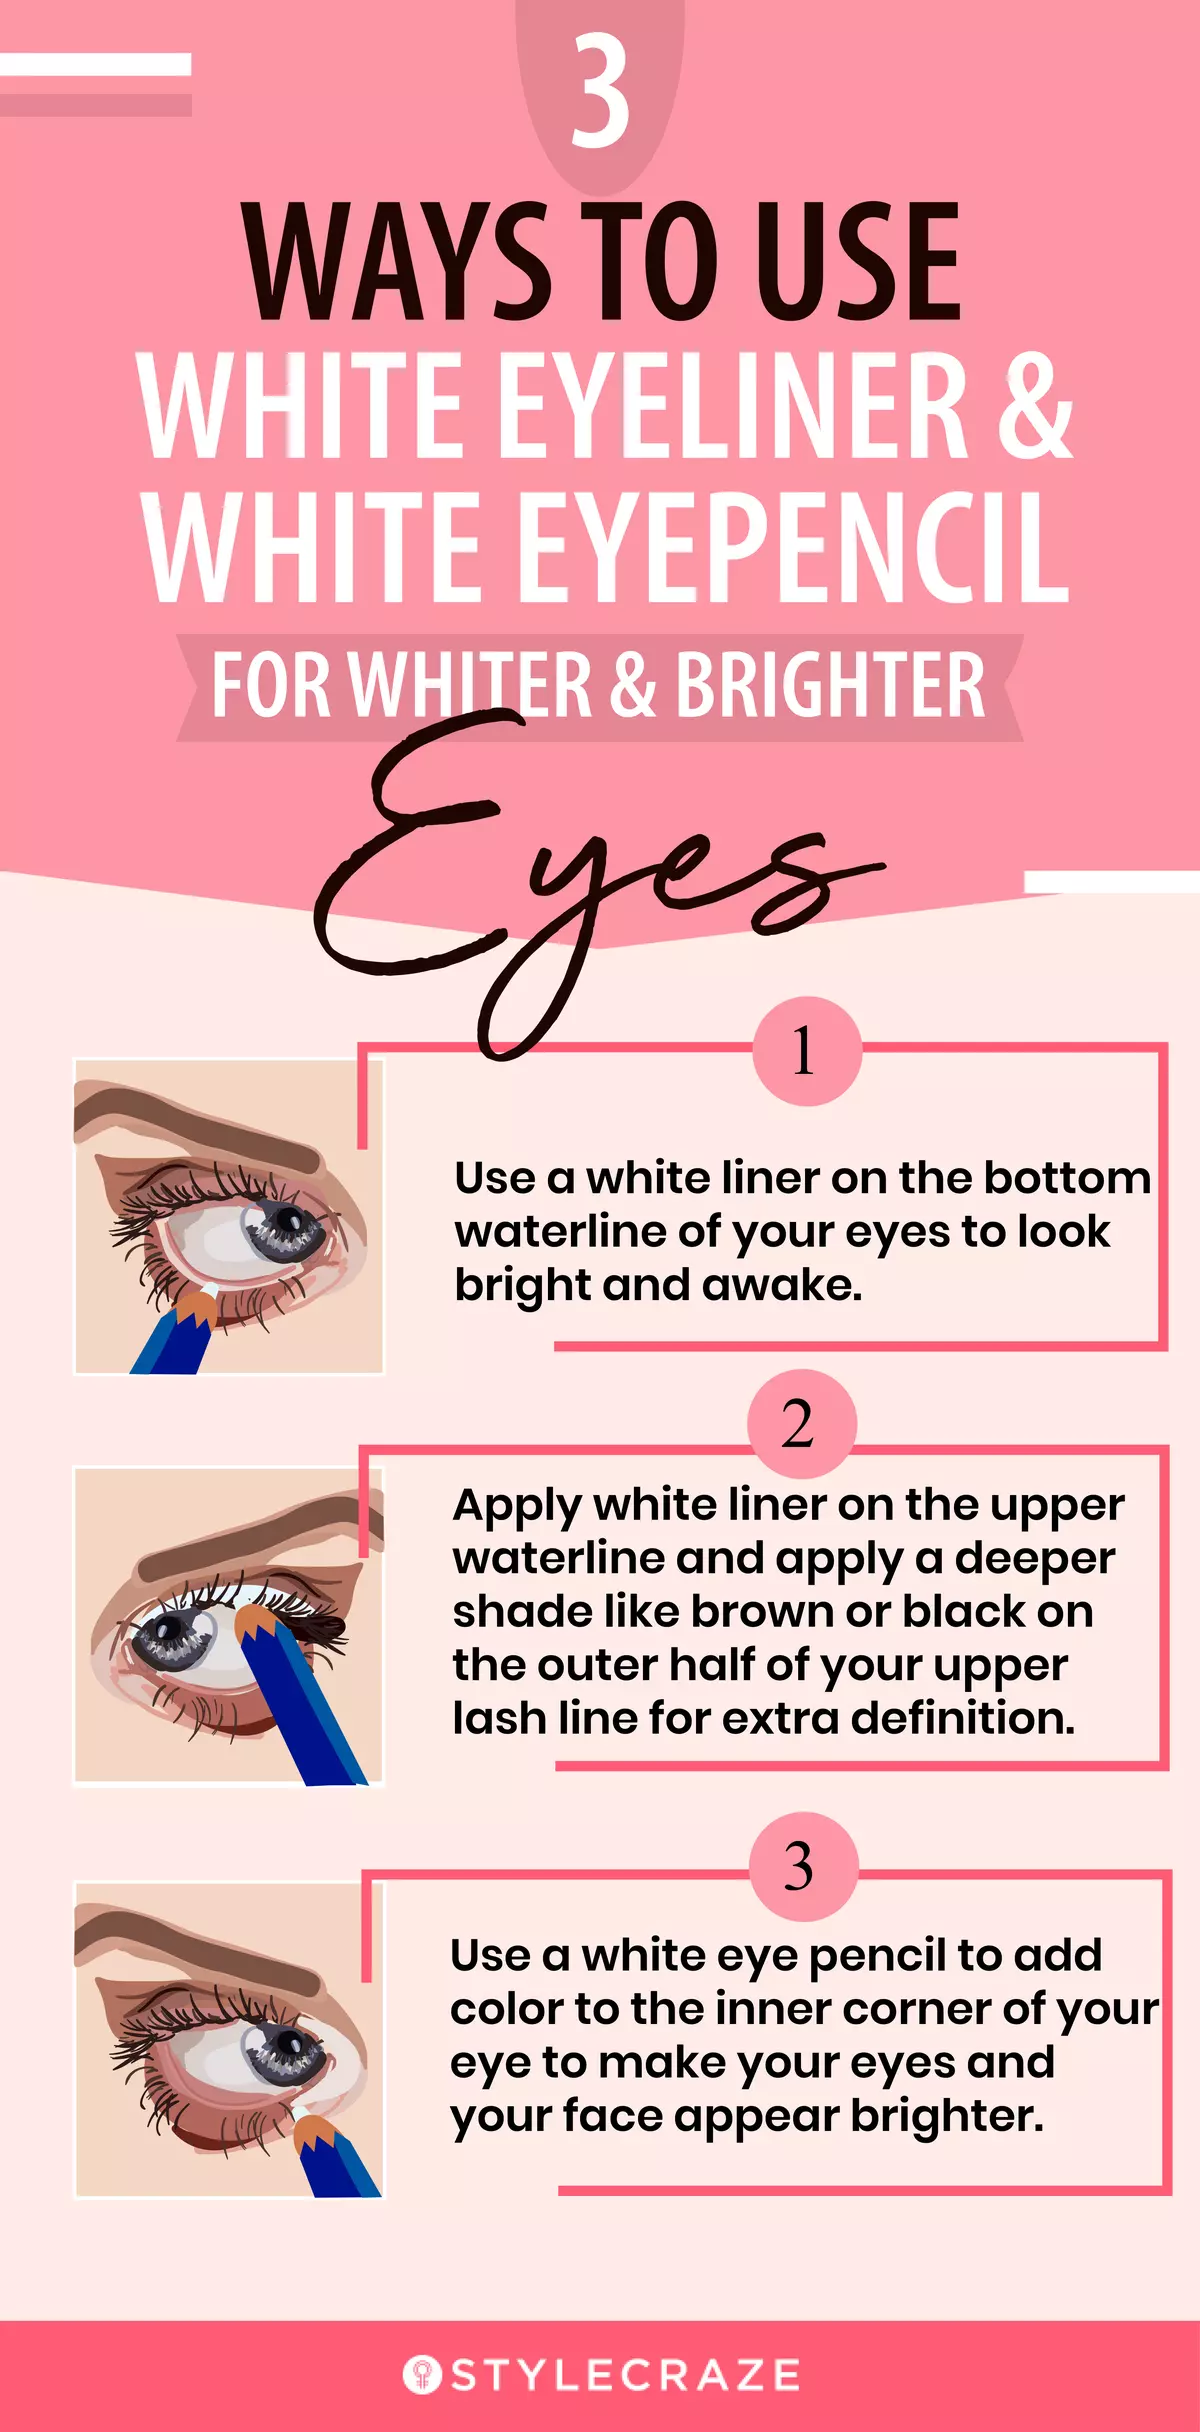 3 ways to use white eyeliner and white eyepencil for whiter and brighter eyes (infographic)